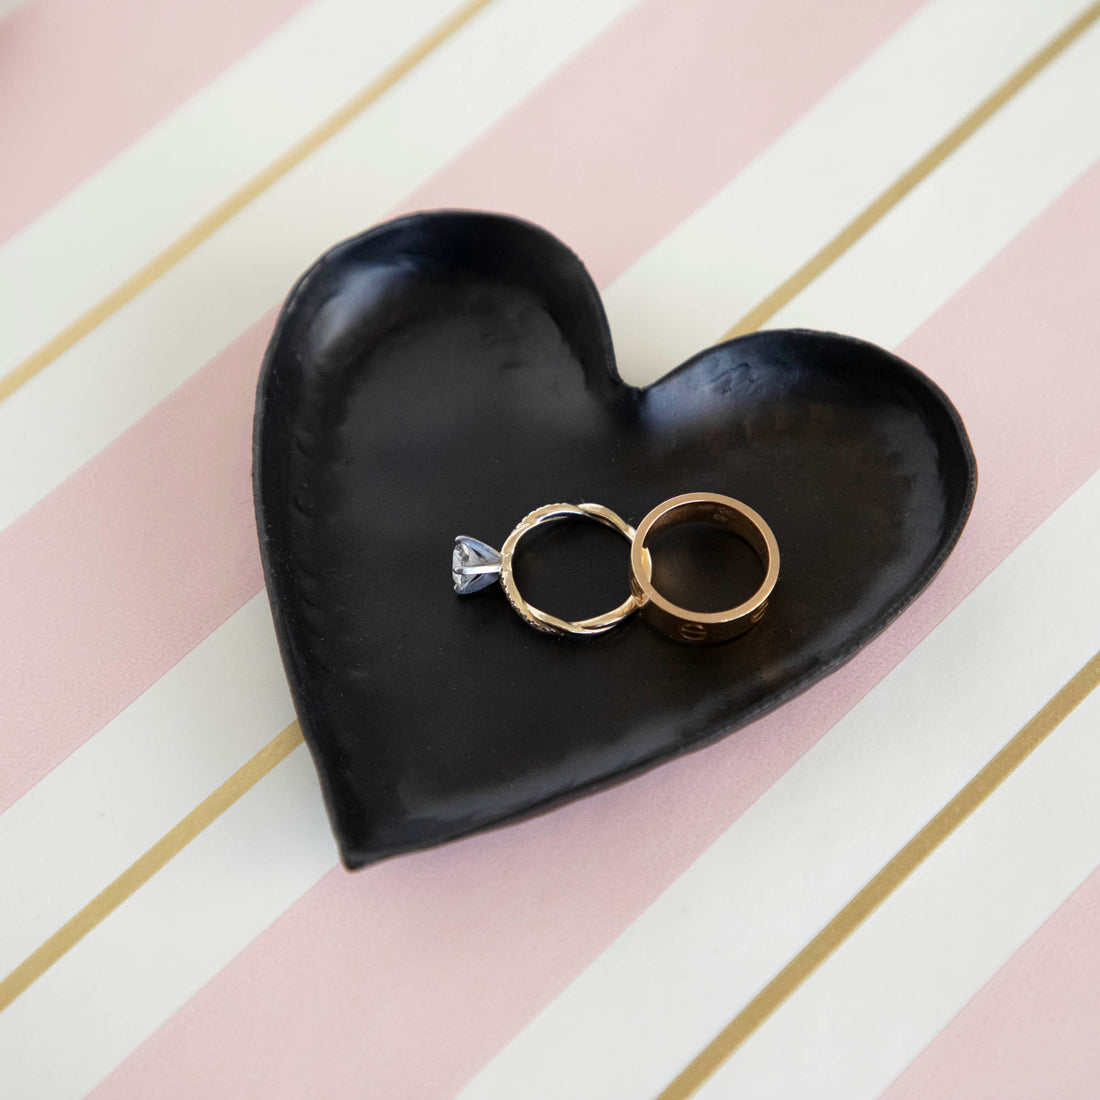 A HomArt Forged Iron Heart Tray with gold and silver rings on a copper-colored, pink, and white striped surface.